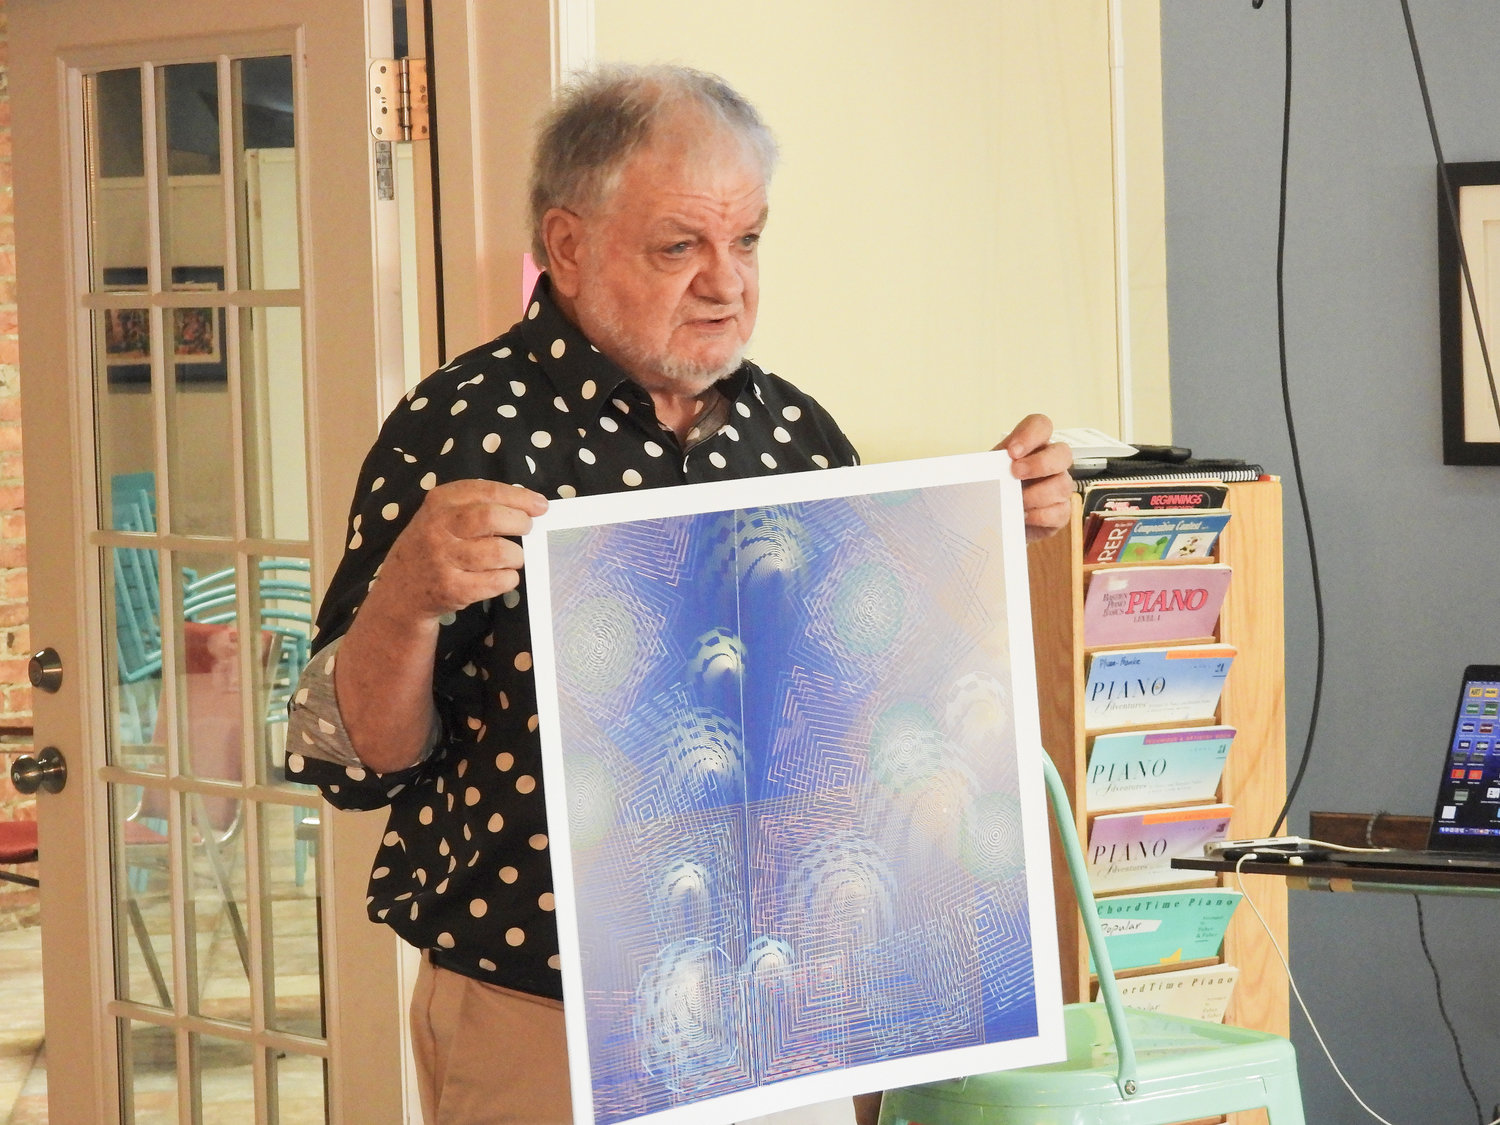 Local artist Stephen Carpenter held a meeting at the Oneida Lakes Arts and Heritage Center and unveiled his latest project: Bolero de Cochereau. The North Bay artist is looking to render the musical piece of Pierre Cochereau into color, shape, and space as a cinematic expression